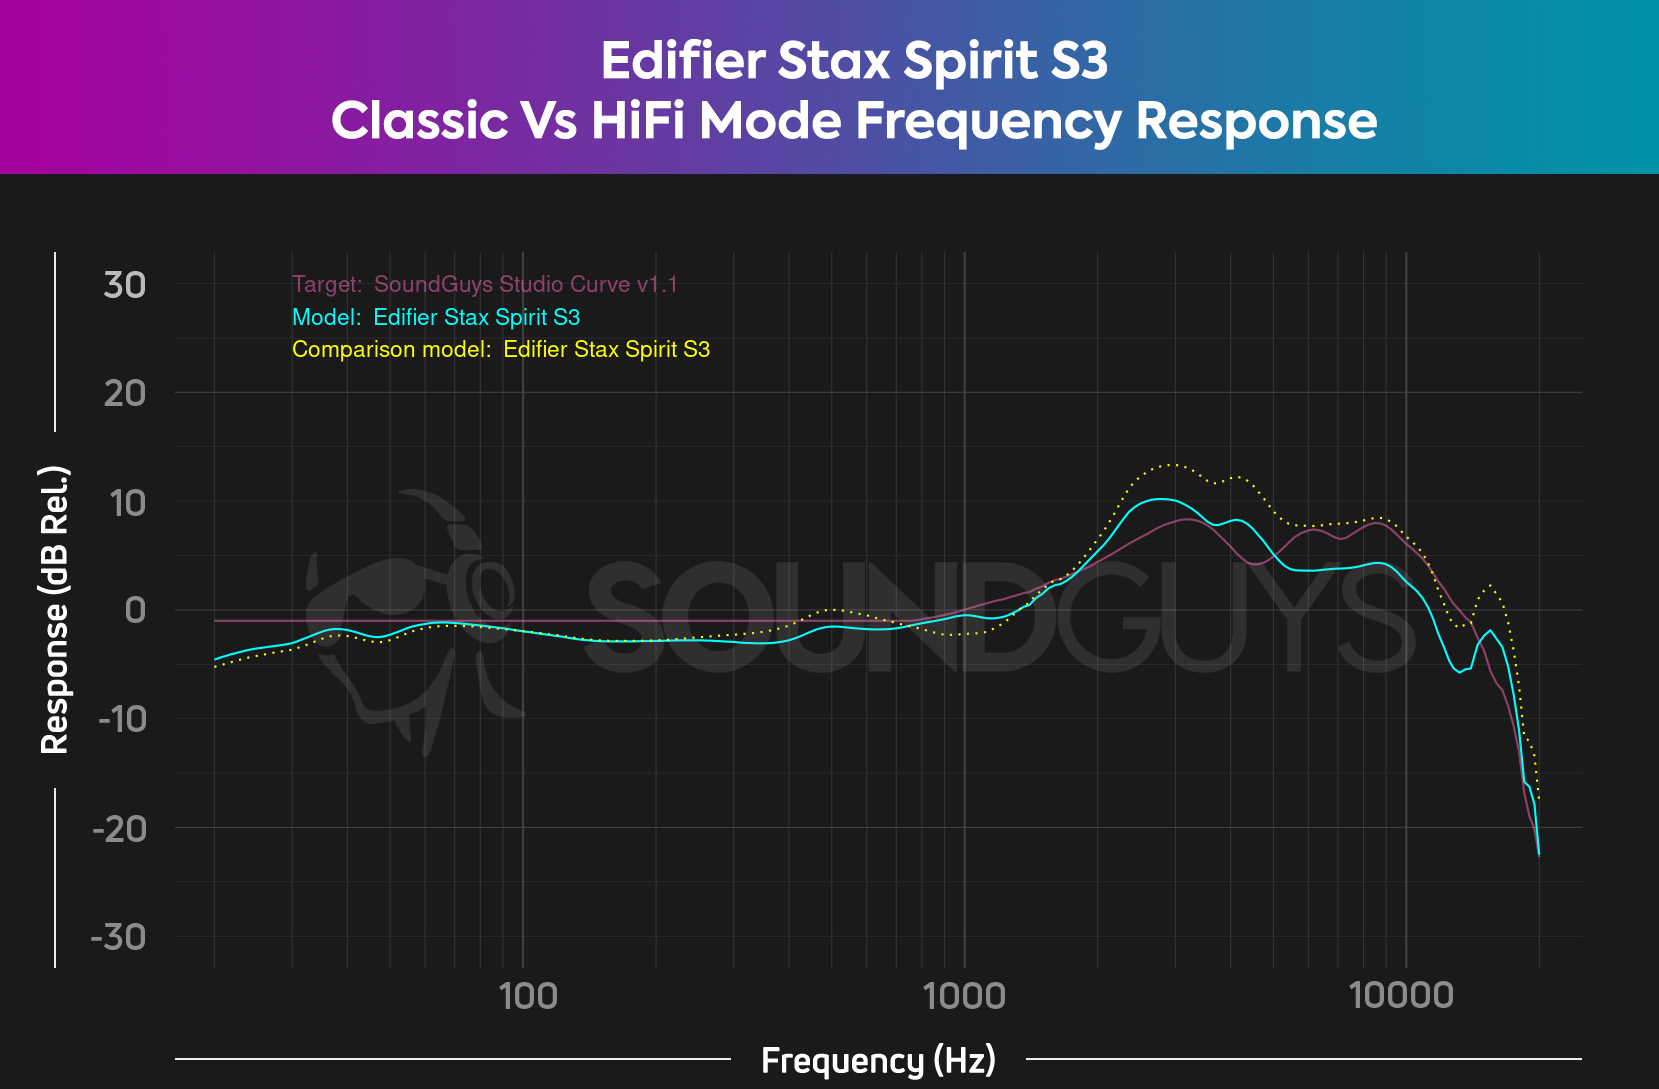 A chart comparing the frequency response of the Edifier Stax Spirit S3 Classic mode with HiFi mode